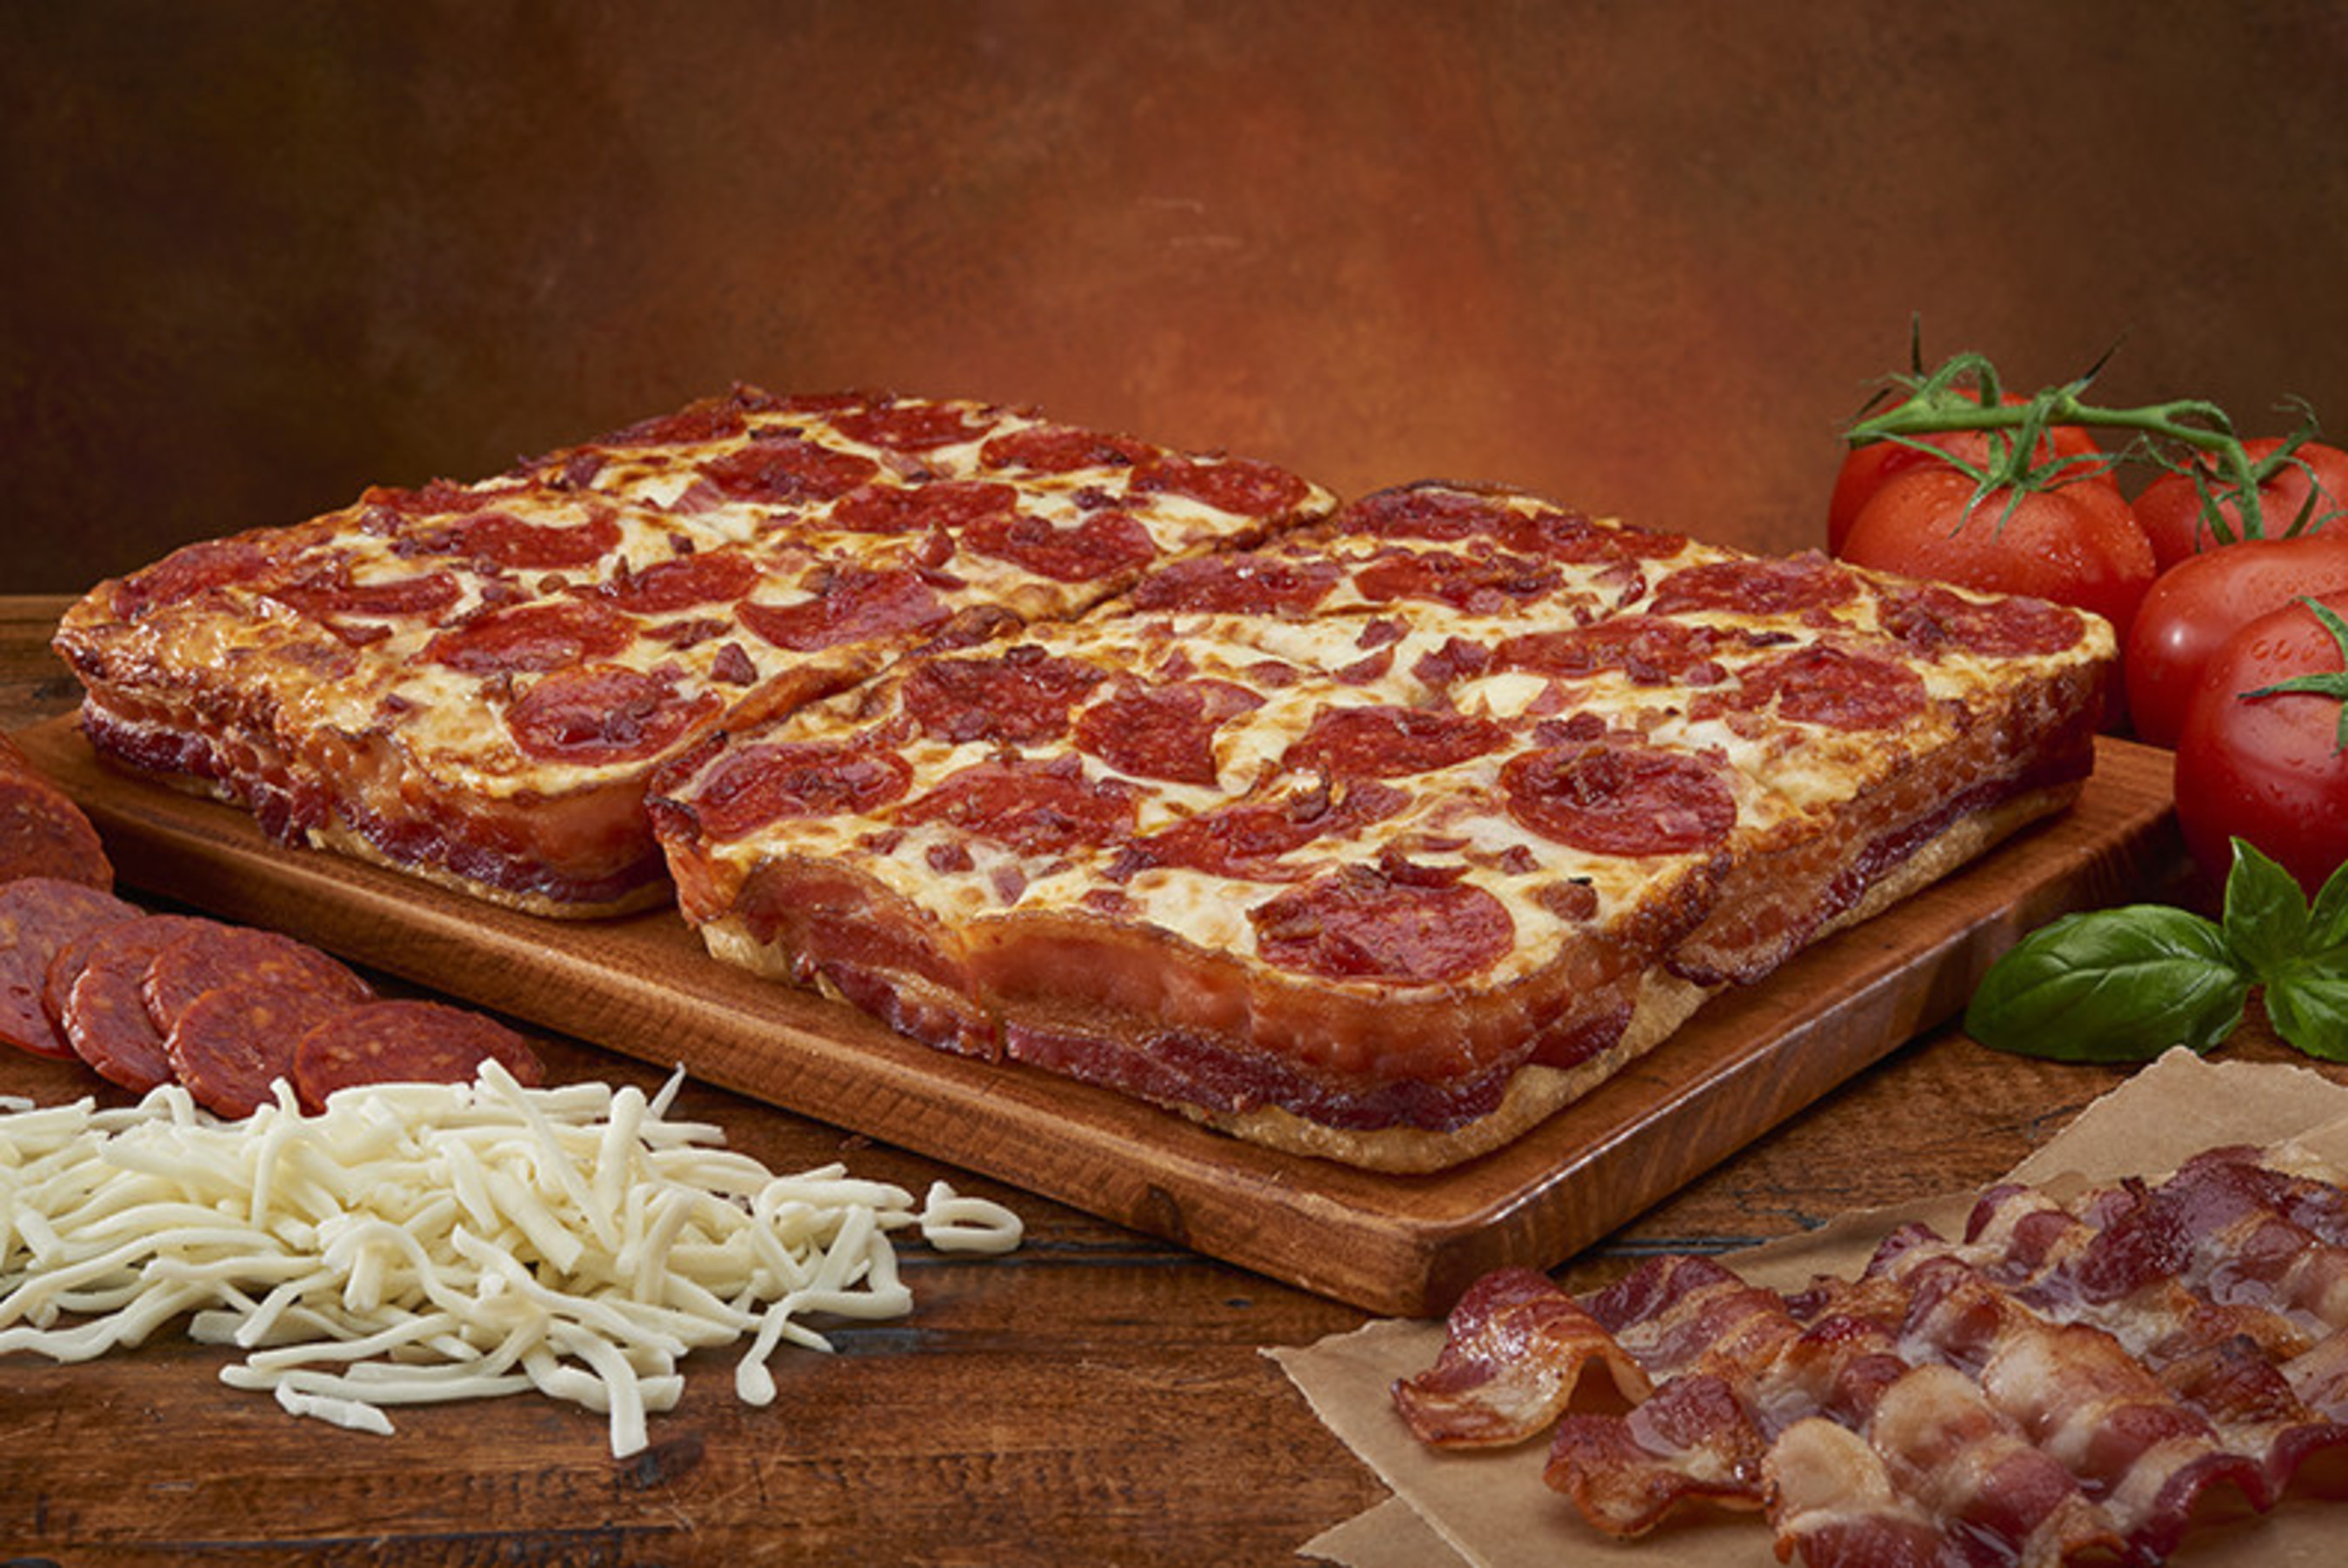 Beginning February 23, for a limited time, Little Caesars is offering a Bacon Wrapped Crust DEEP!DEEP! Dish pizza. Dive in to this 8-corner deep dish pizza wrapped in decadent whole strips of thick-cut, crispy bacon, and then topped with pepperoni and even more delicious bits of savory bacon goodness.